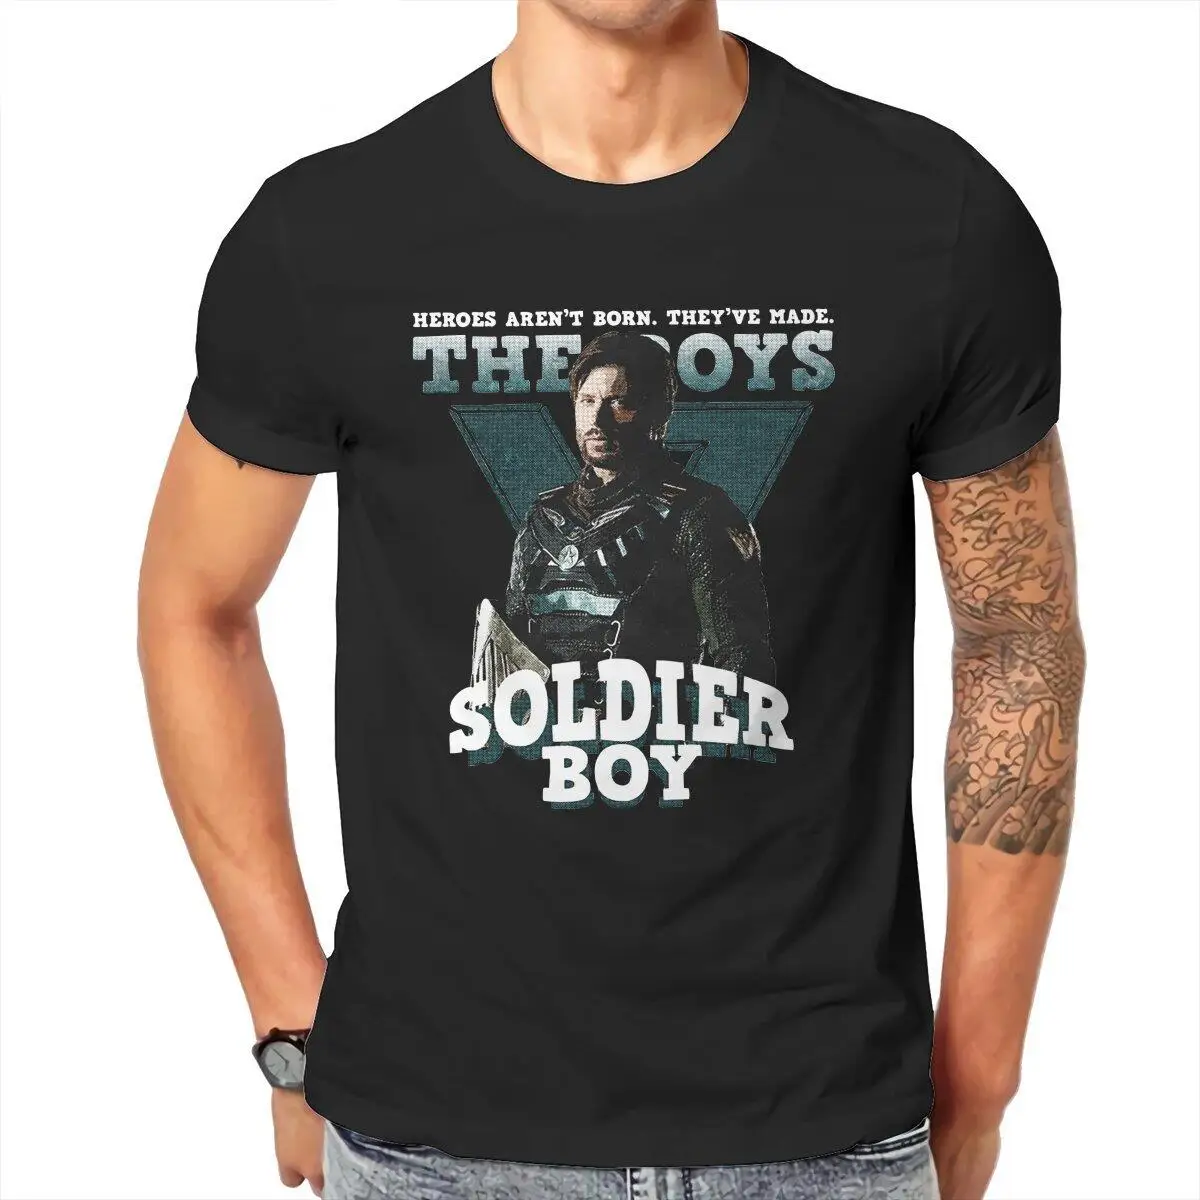 Soldier Boy The Boys Comic Style  T Shirt Men's  100% Cotton Amazing T-Shirts O Neck  Tee Shirt Short Sleeve Tops Graphic